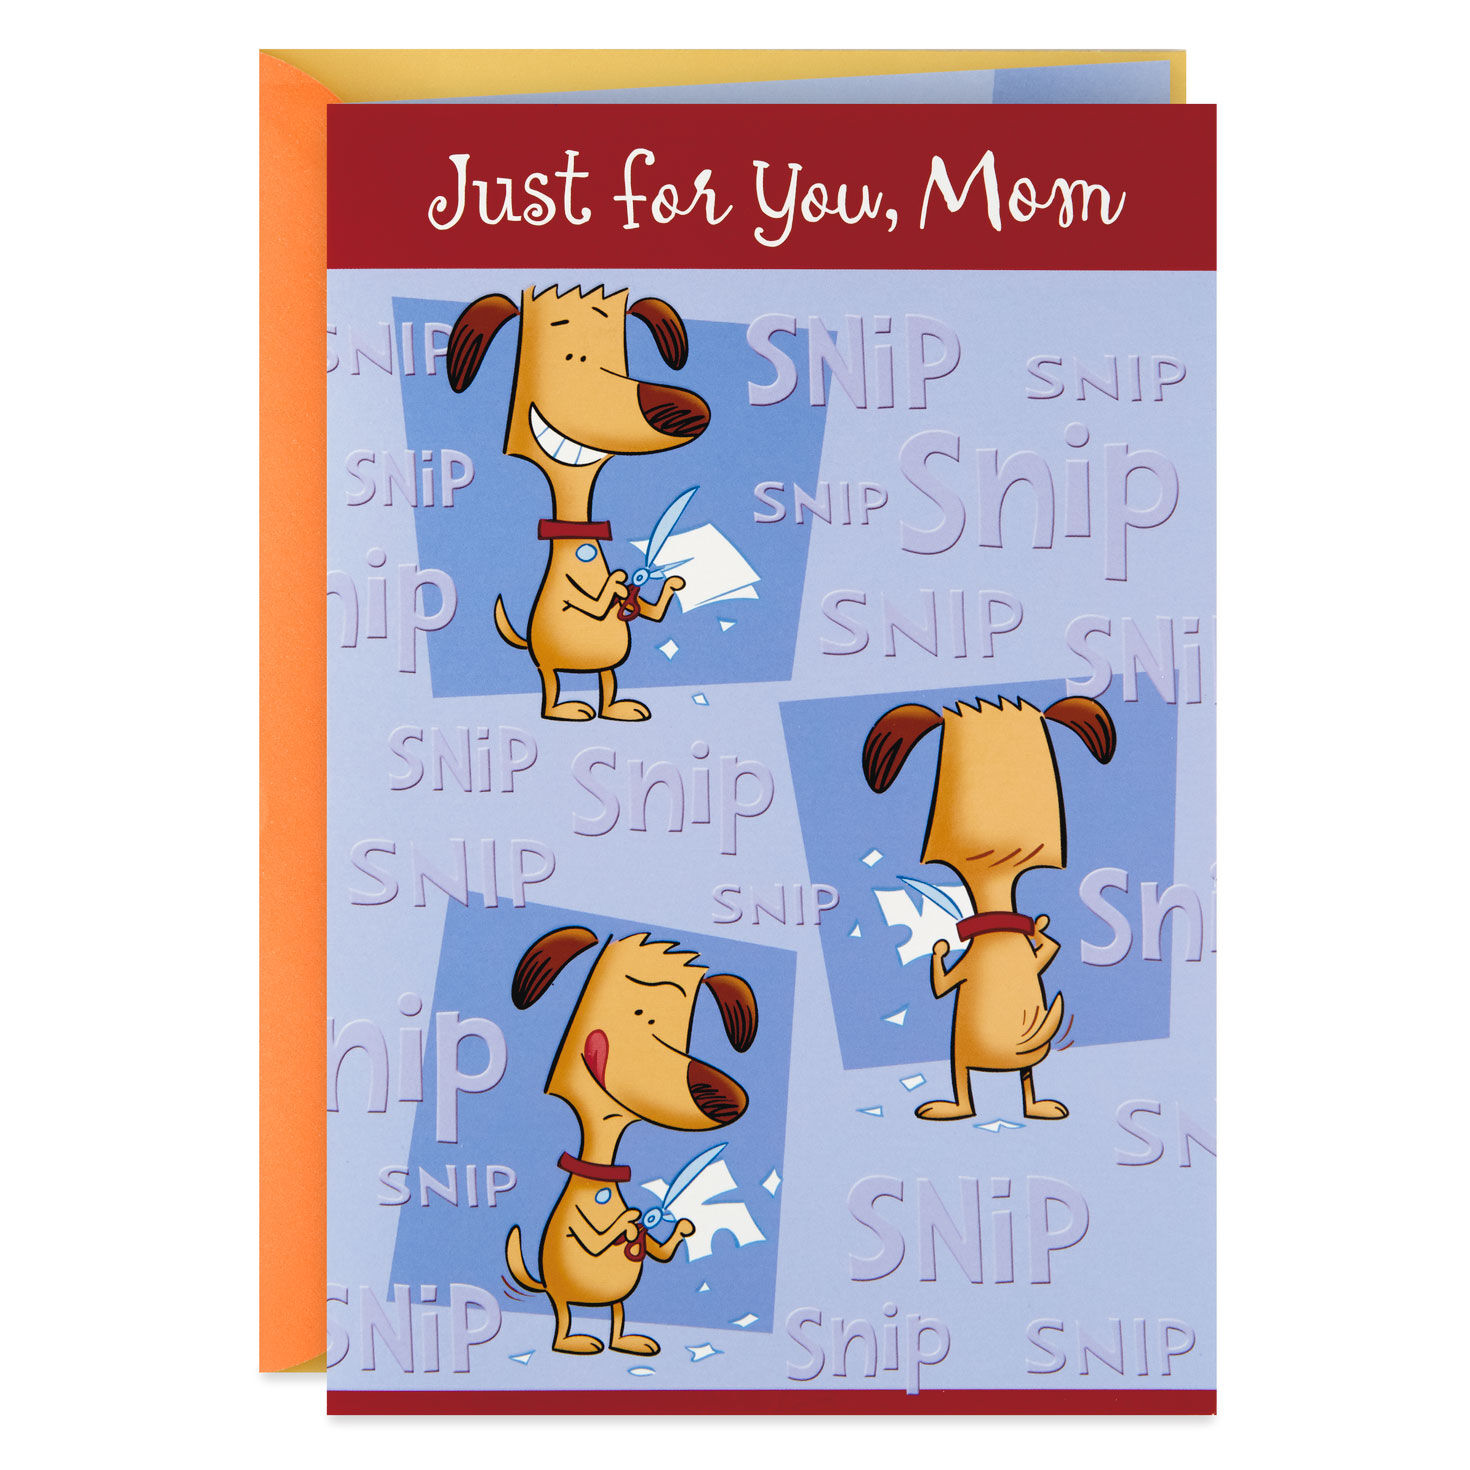 I Love You Sign Pop-Up Birthday Card for Mom for only USD 4.99 | Hallmark